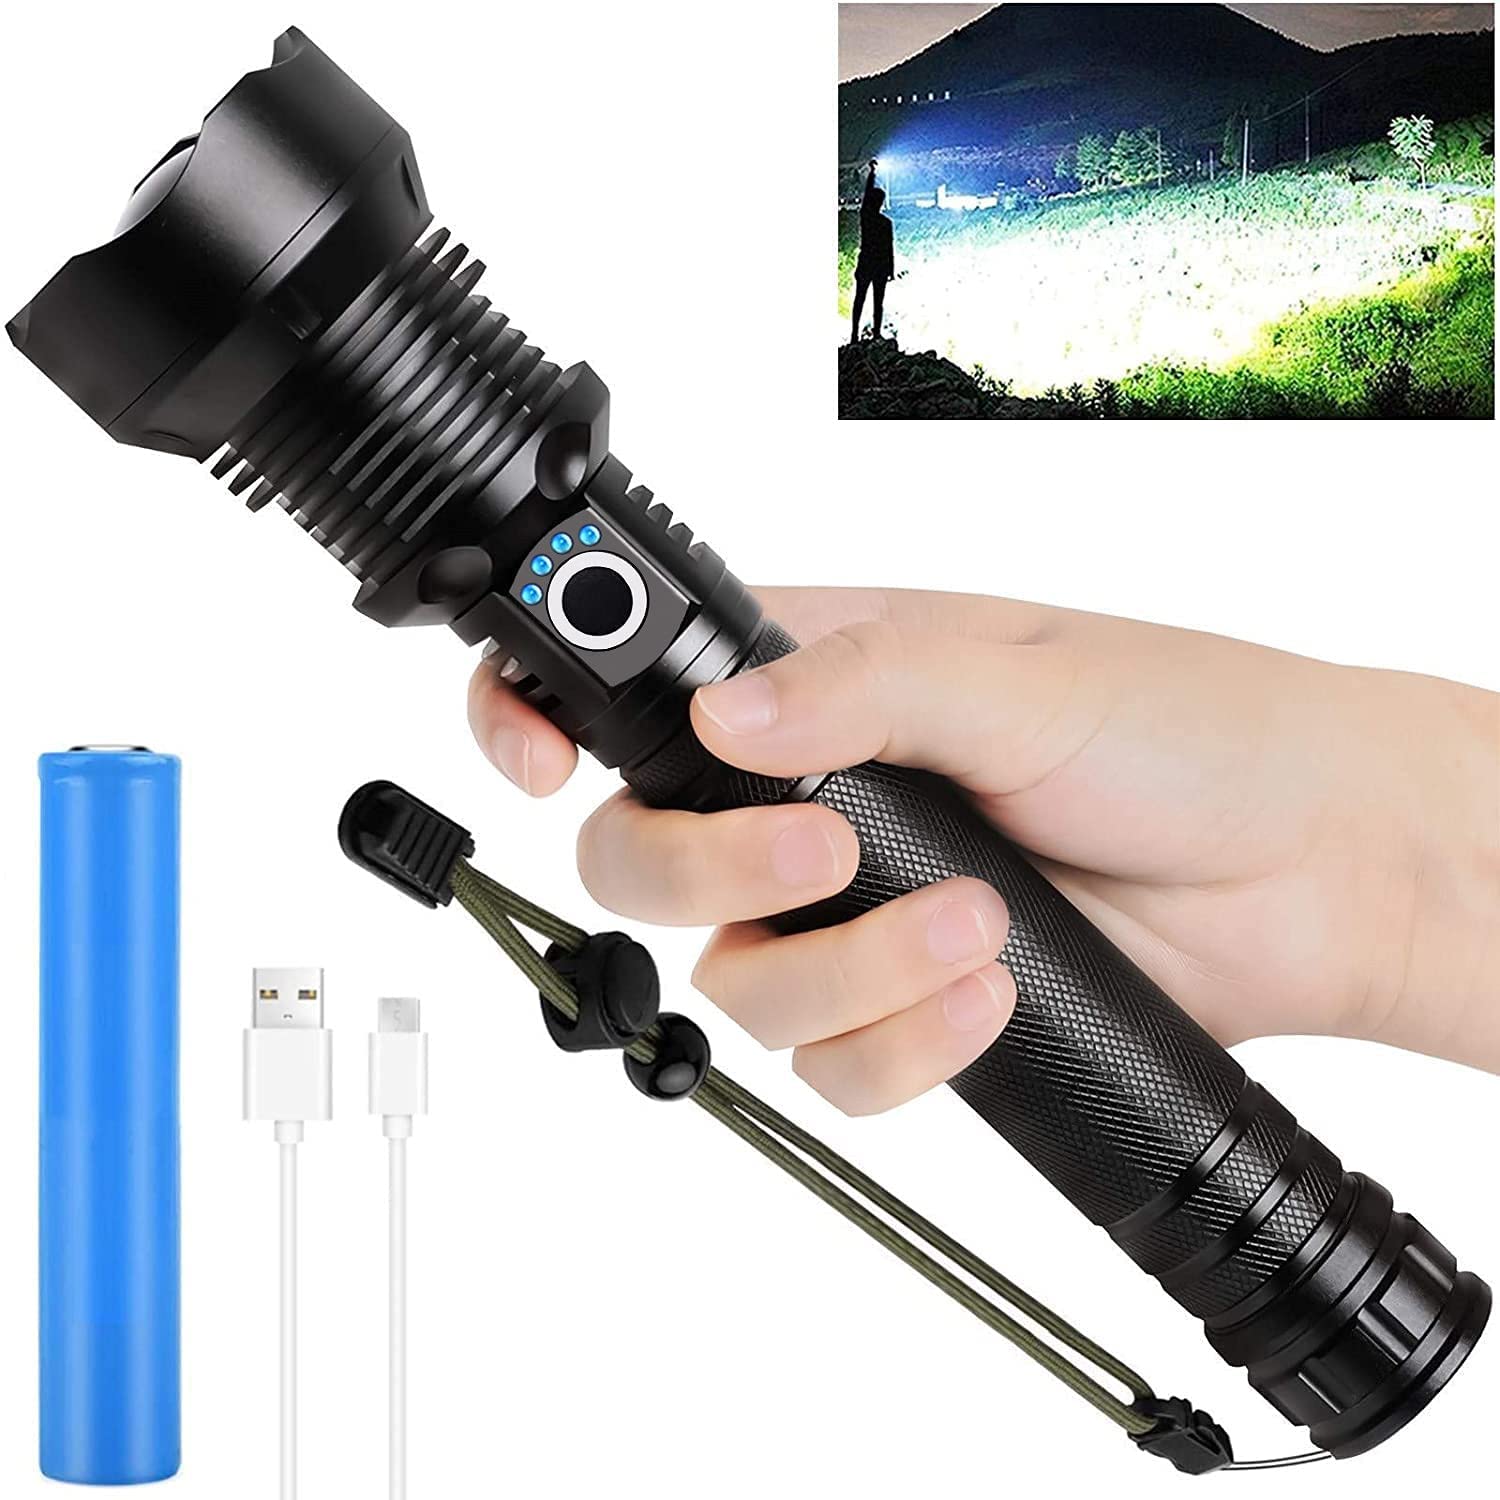 Rechargeable LED Flashlights High Lumens, 90000 Lumens Super Bright  Zoomable Waterproof Flashlight with Batteries Included  Modes, Powerful  Handheld Flashlight for Camping Emergencies